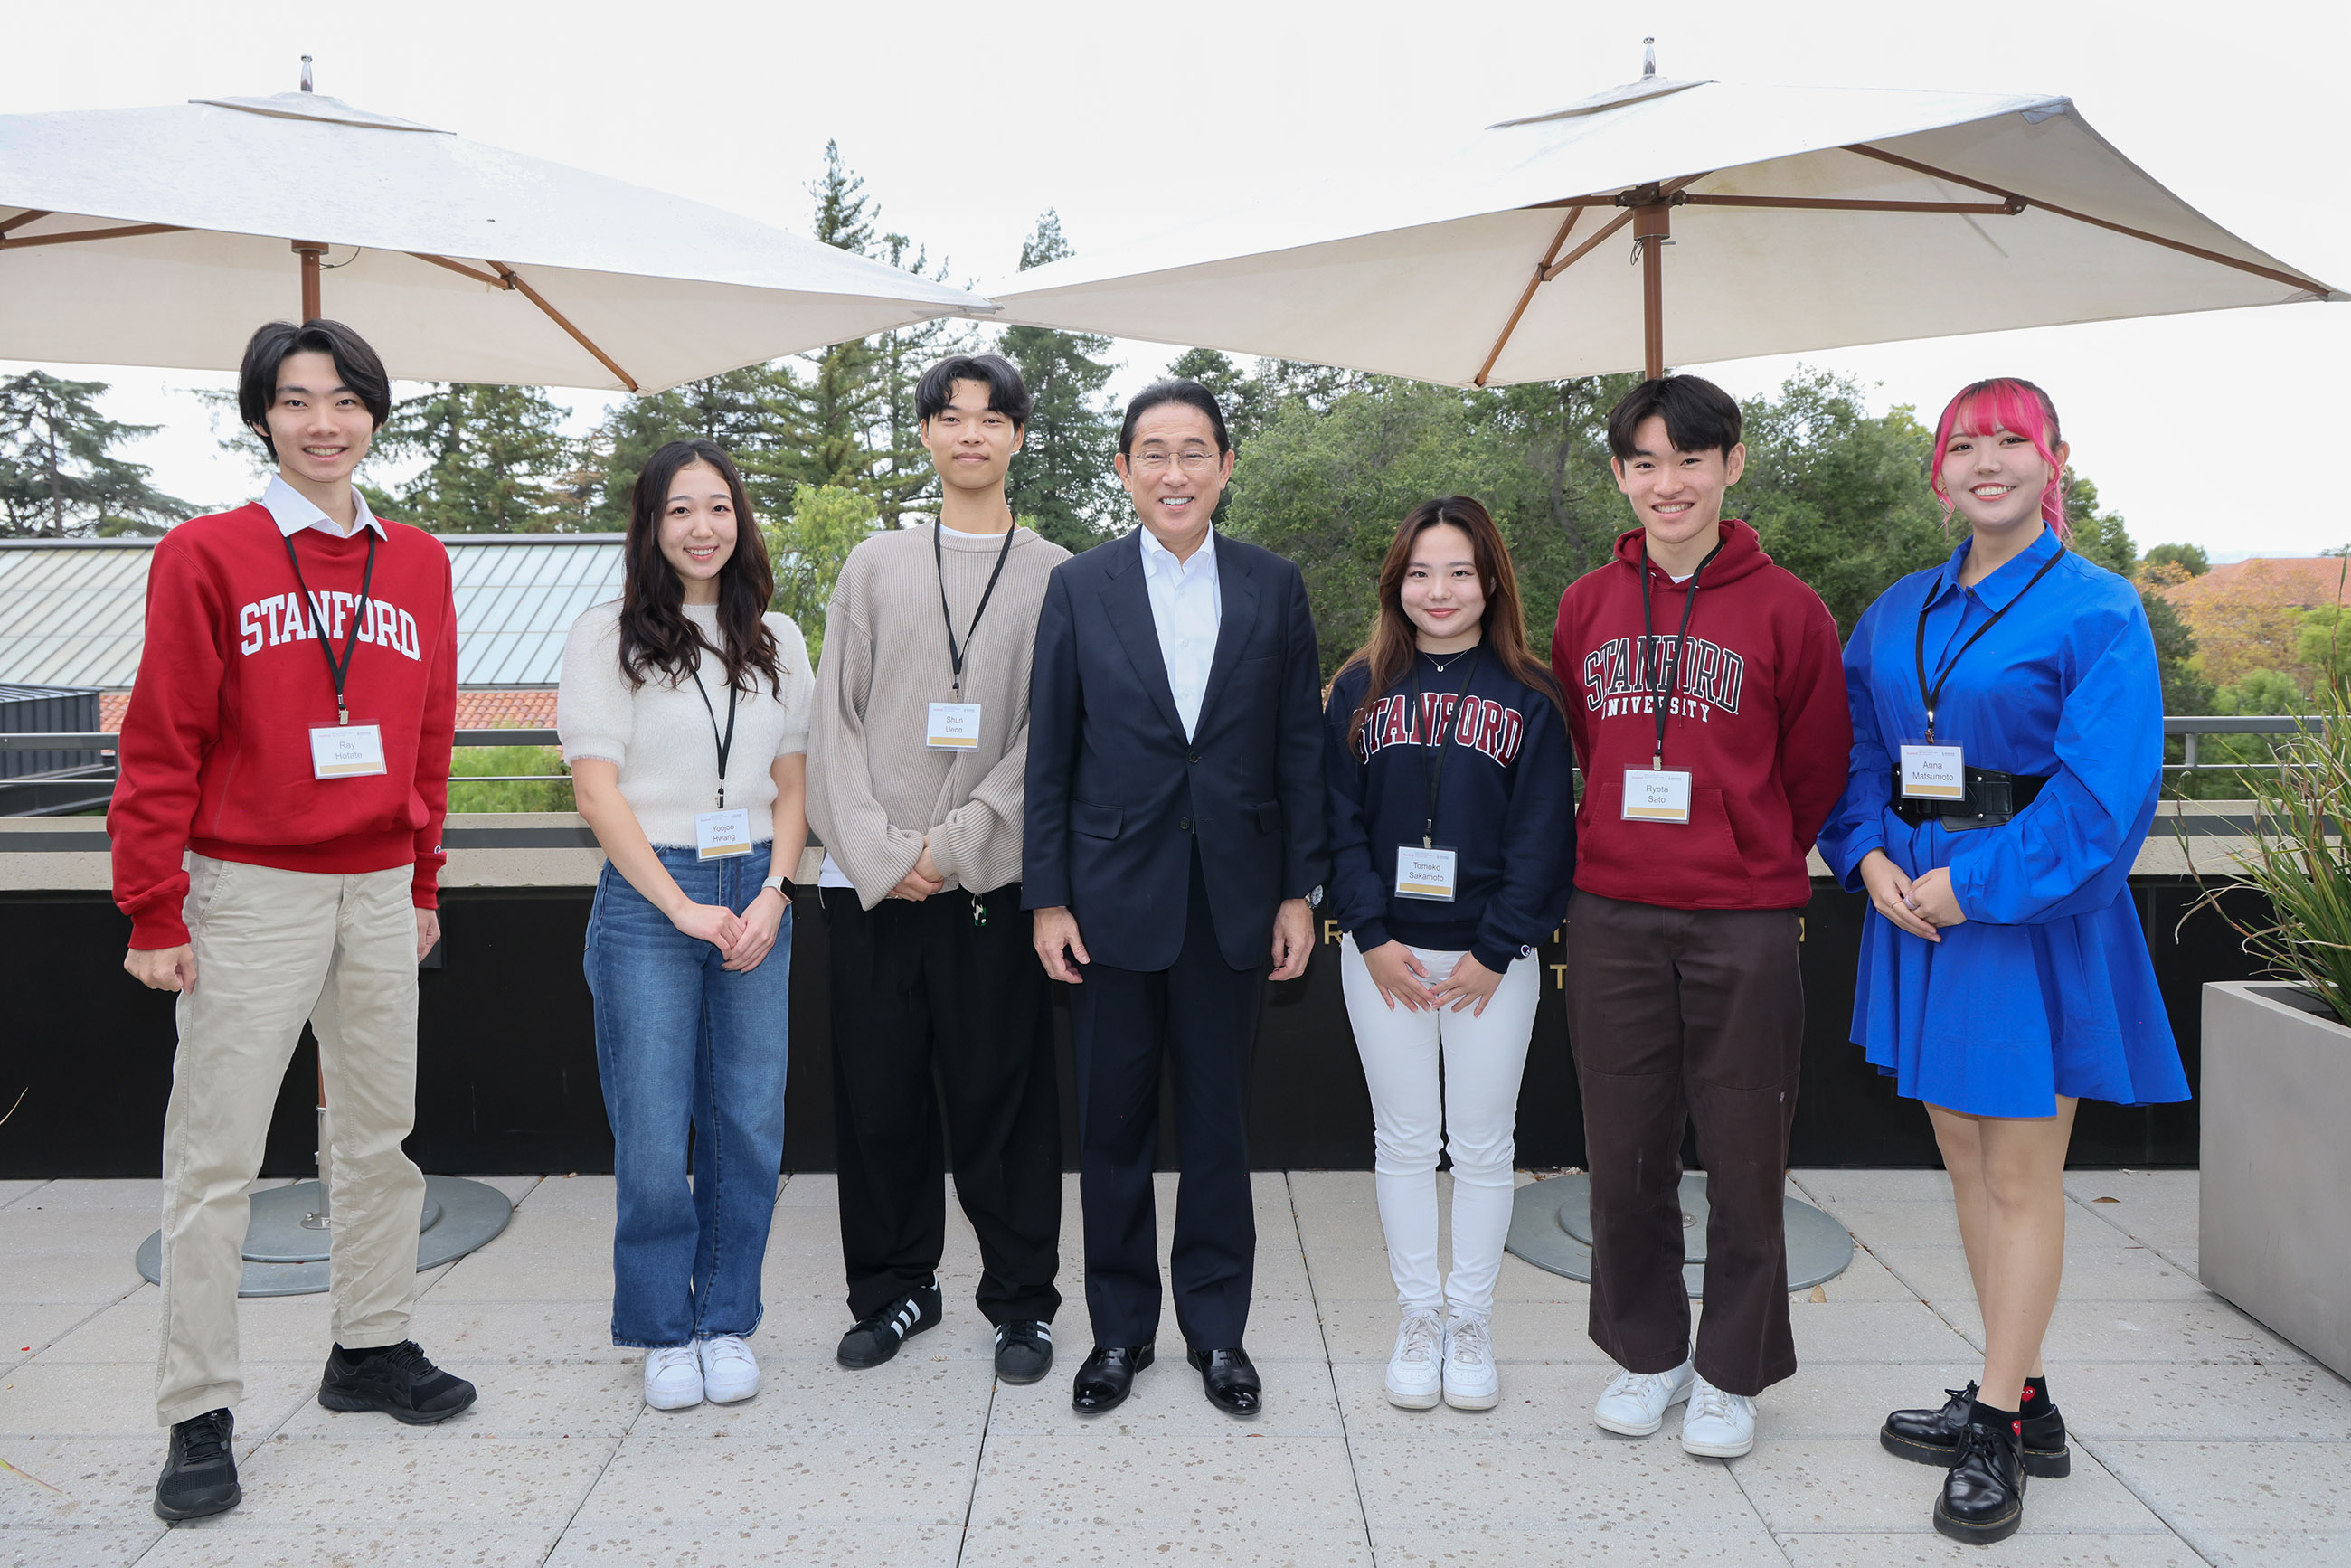 Prime Minister Kishida meeting students from Japan studying at Stanford University (2)